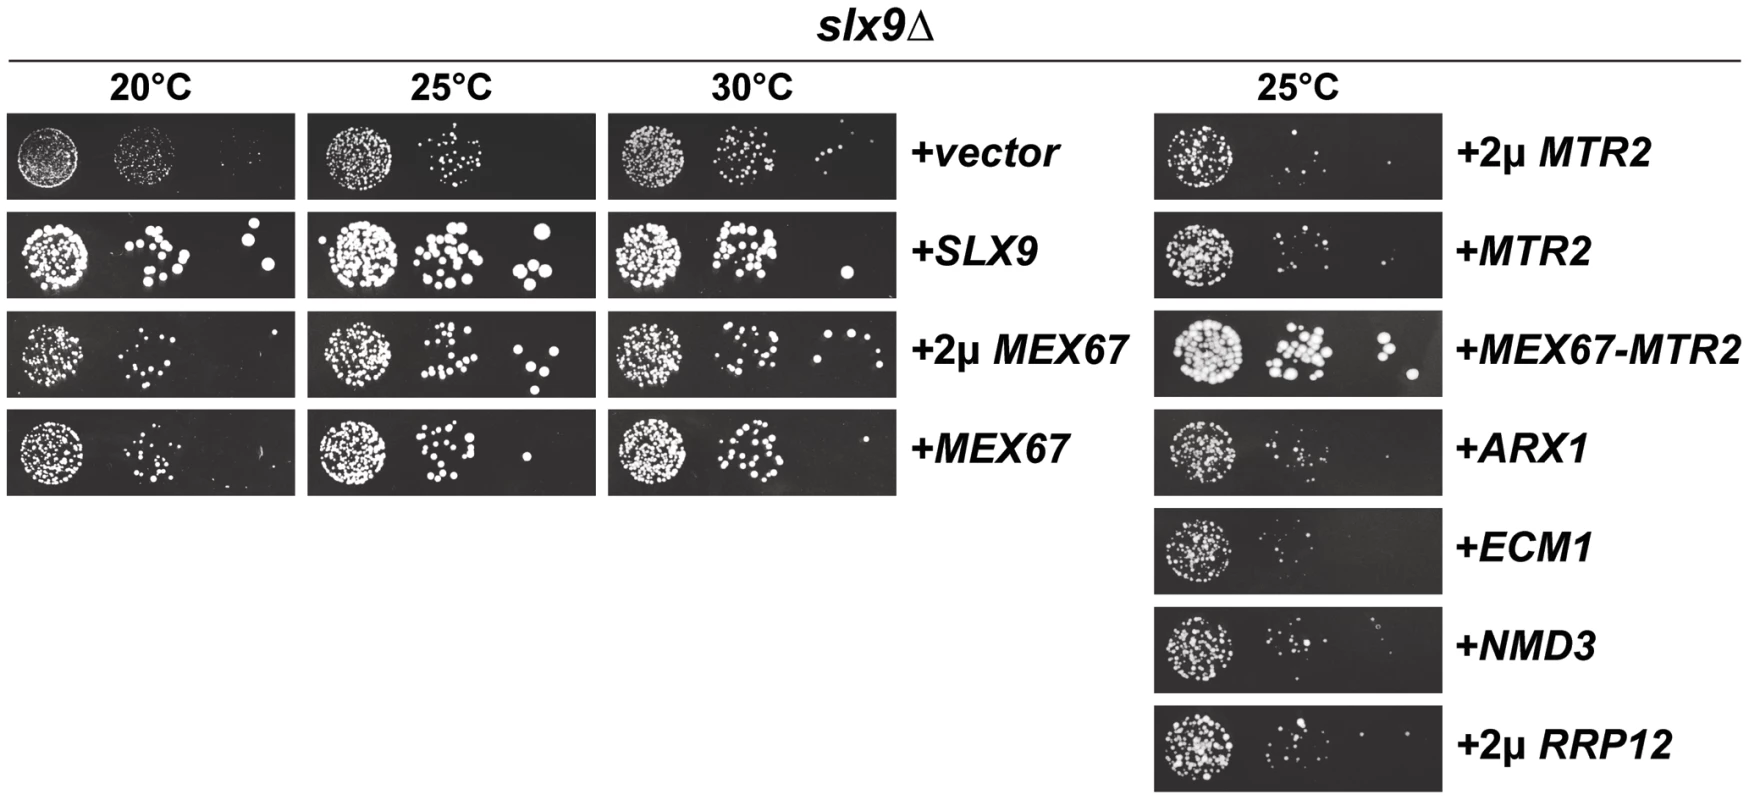 Over-expression of Mex67-Mtr2 rescues impaired growth of the <i>slx9</i>Δ mutant.